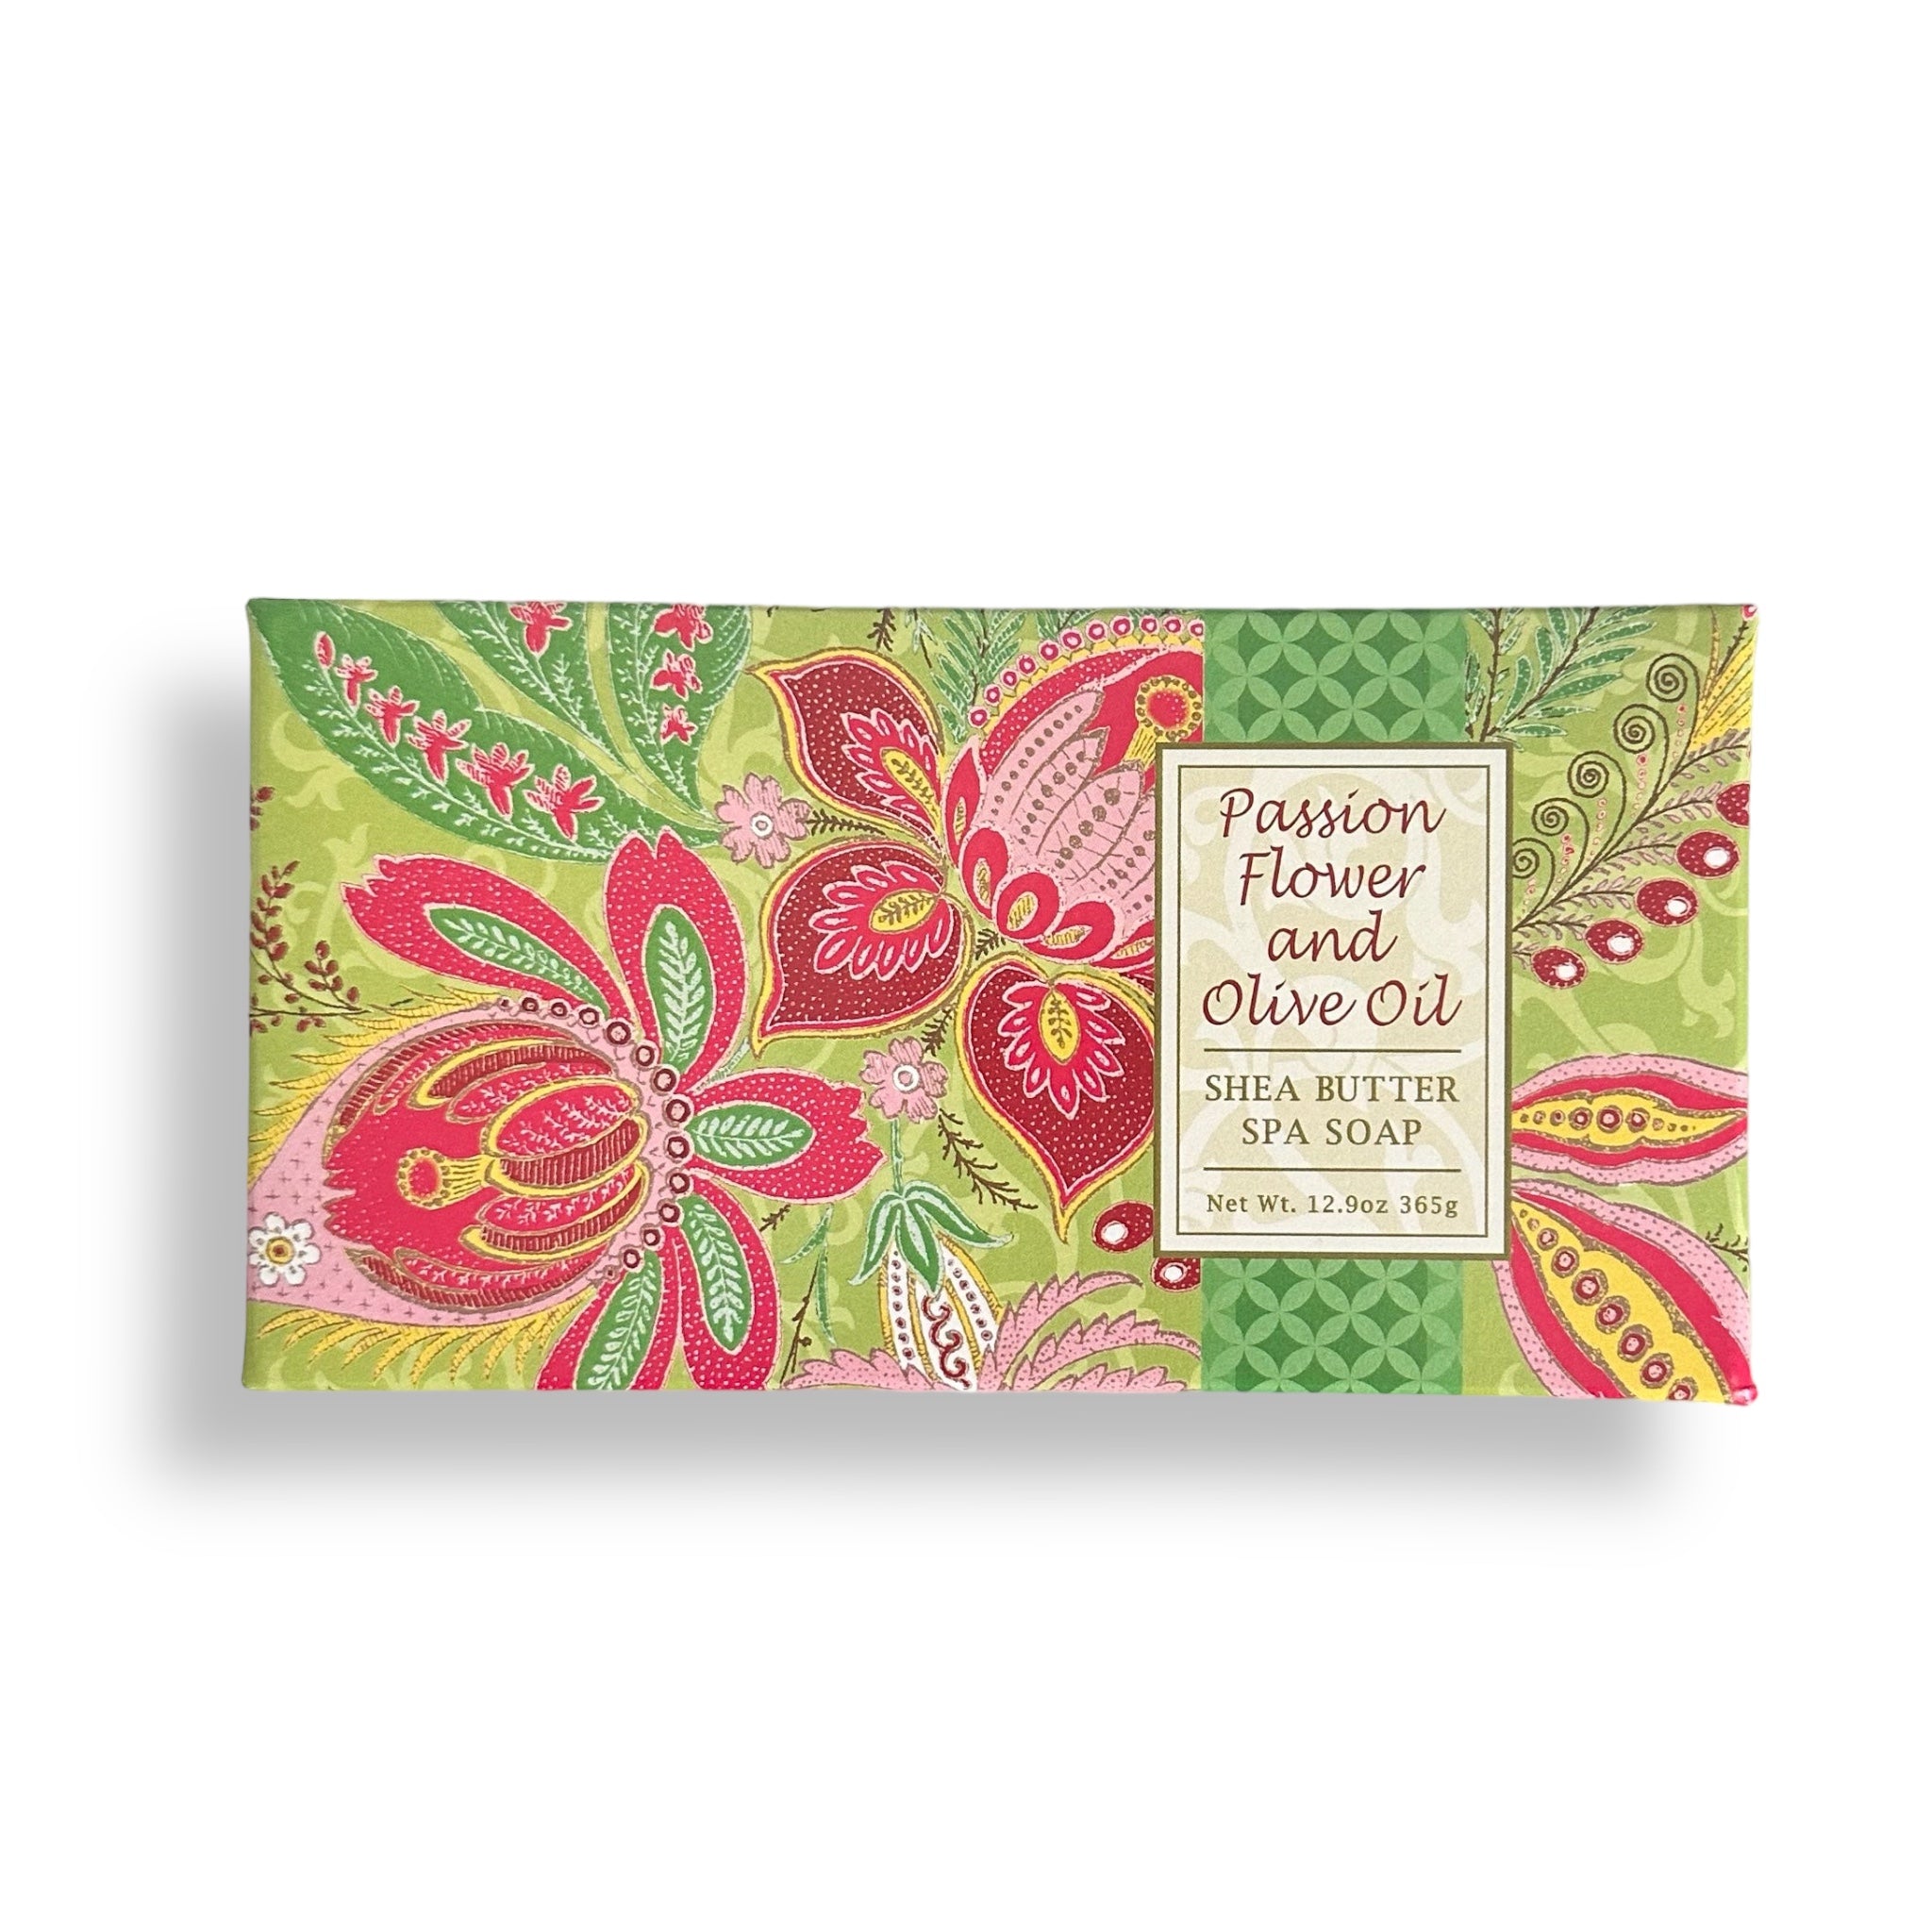 GREENWICH BAY PASSION Flower & OLIVE OIL Soap Gift Set